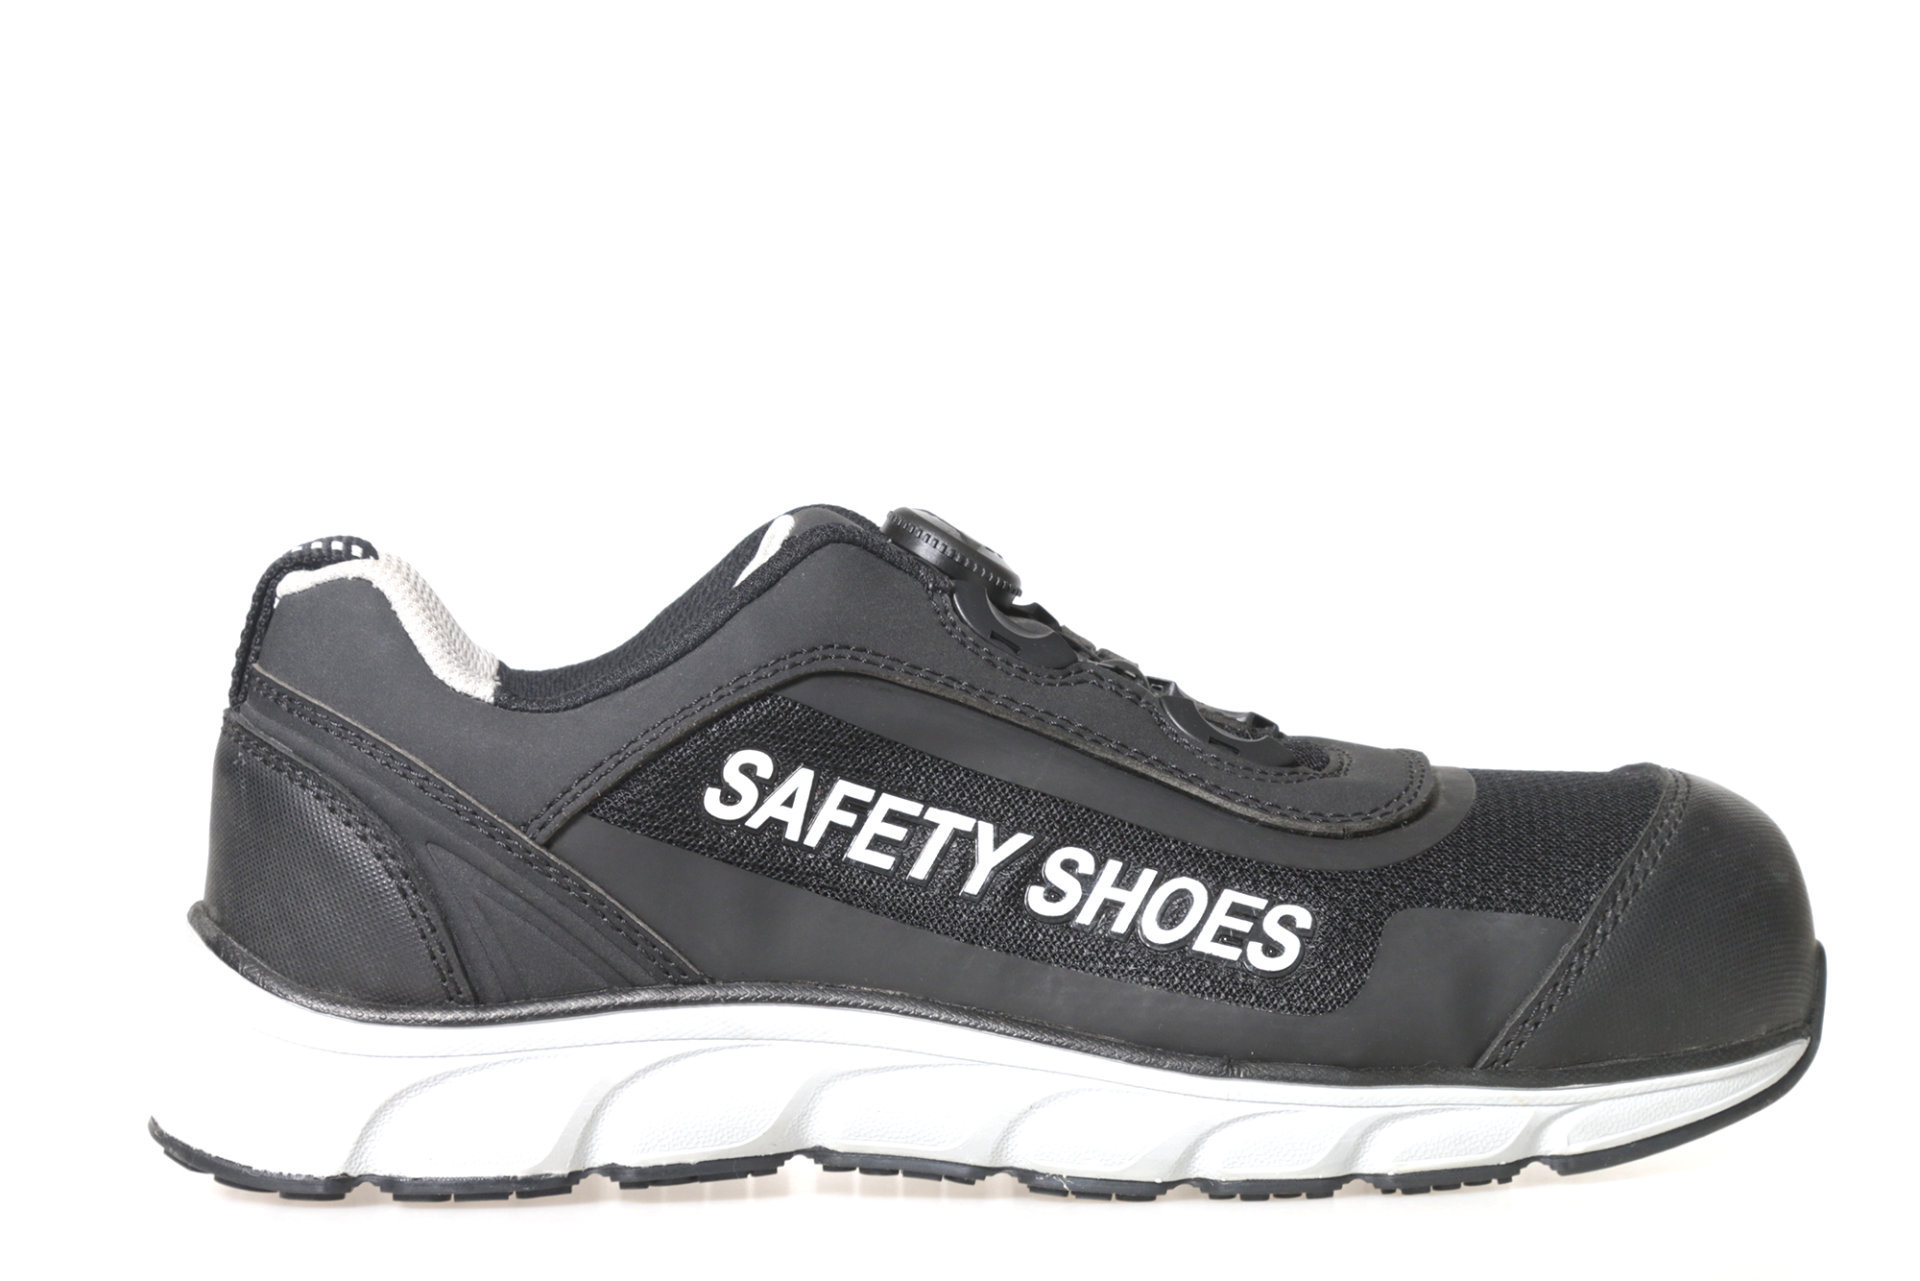 safety boots LMX-000089